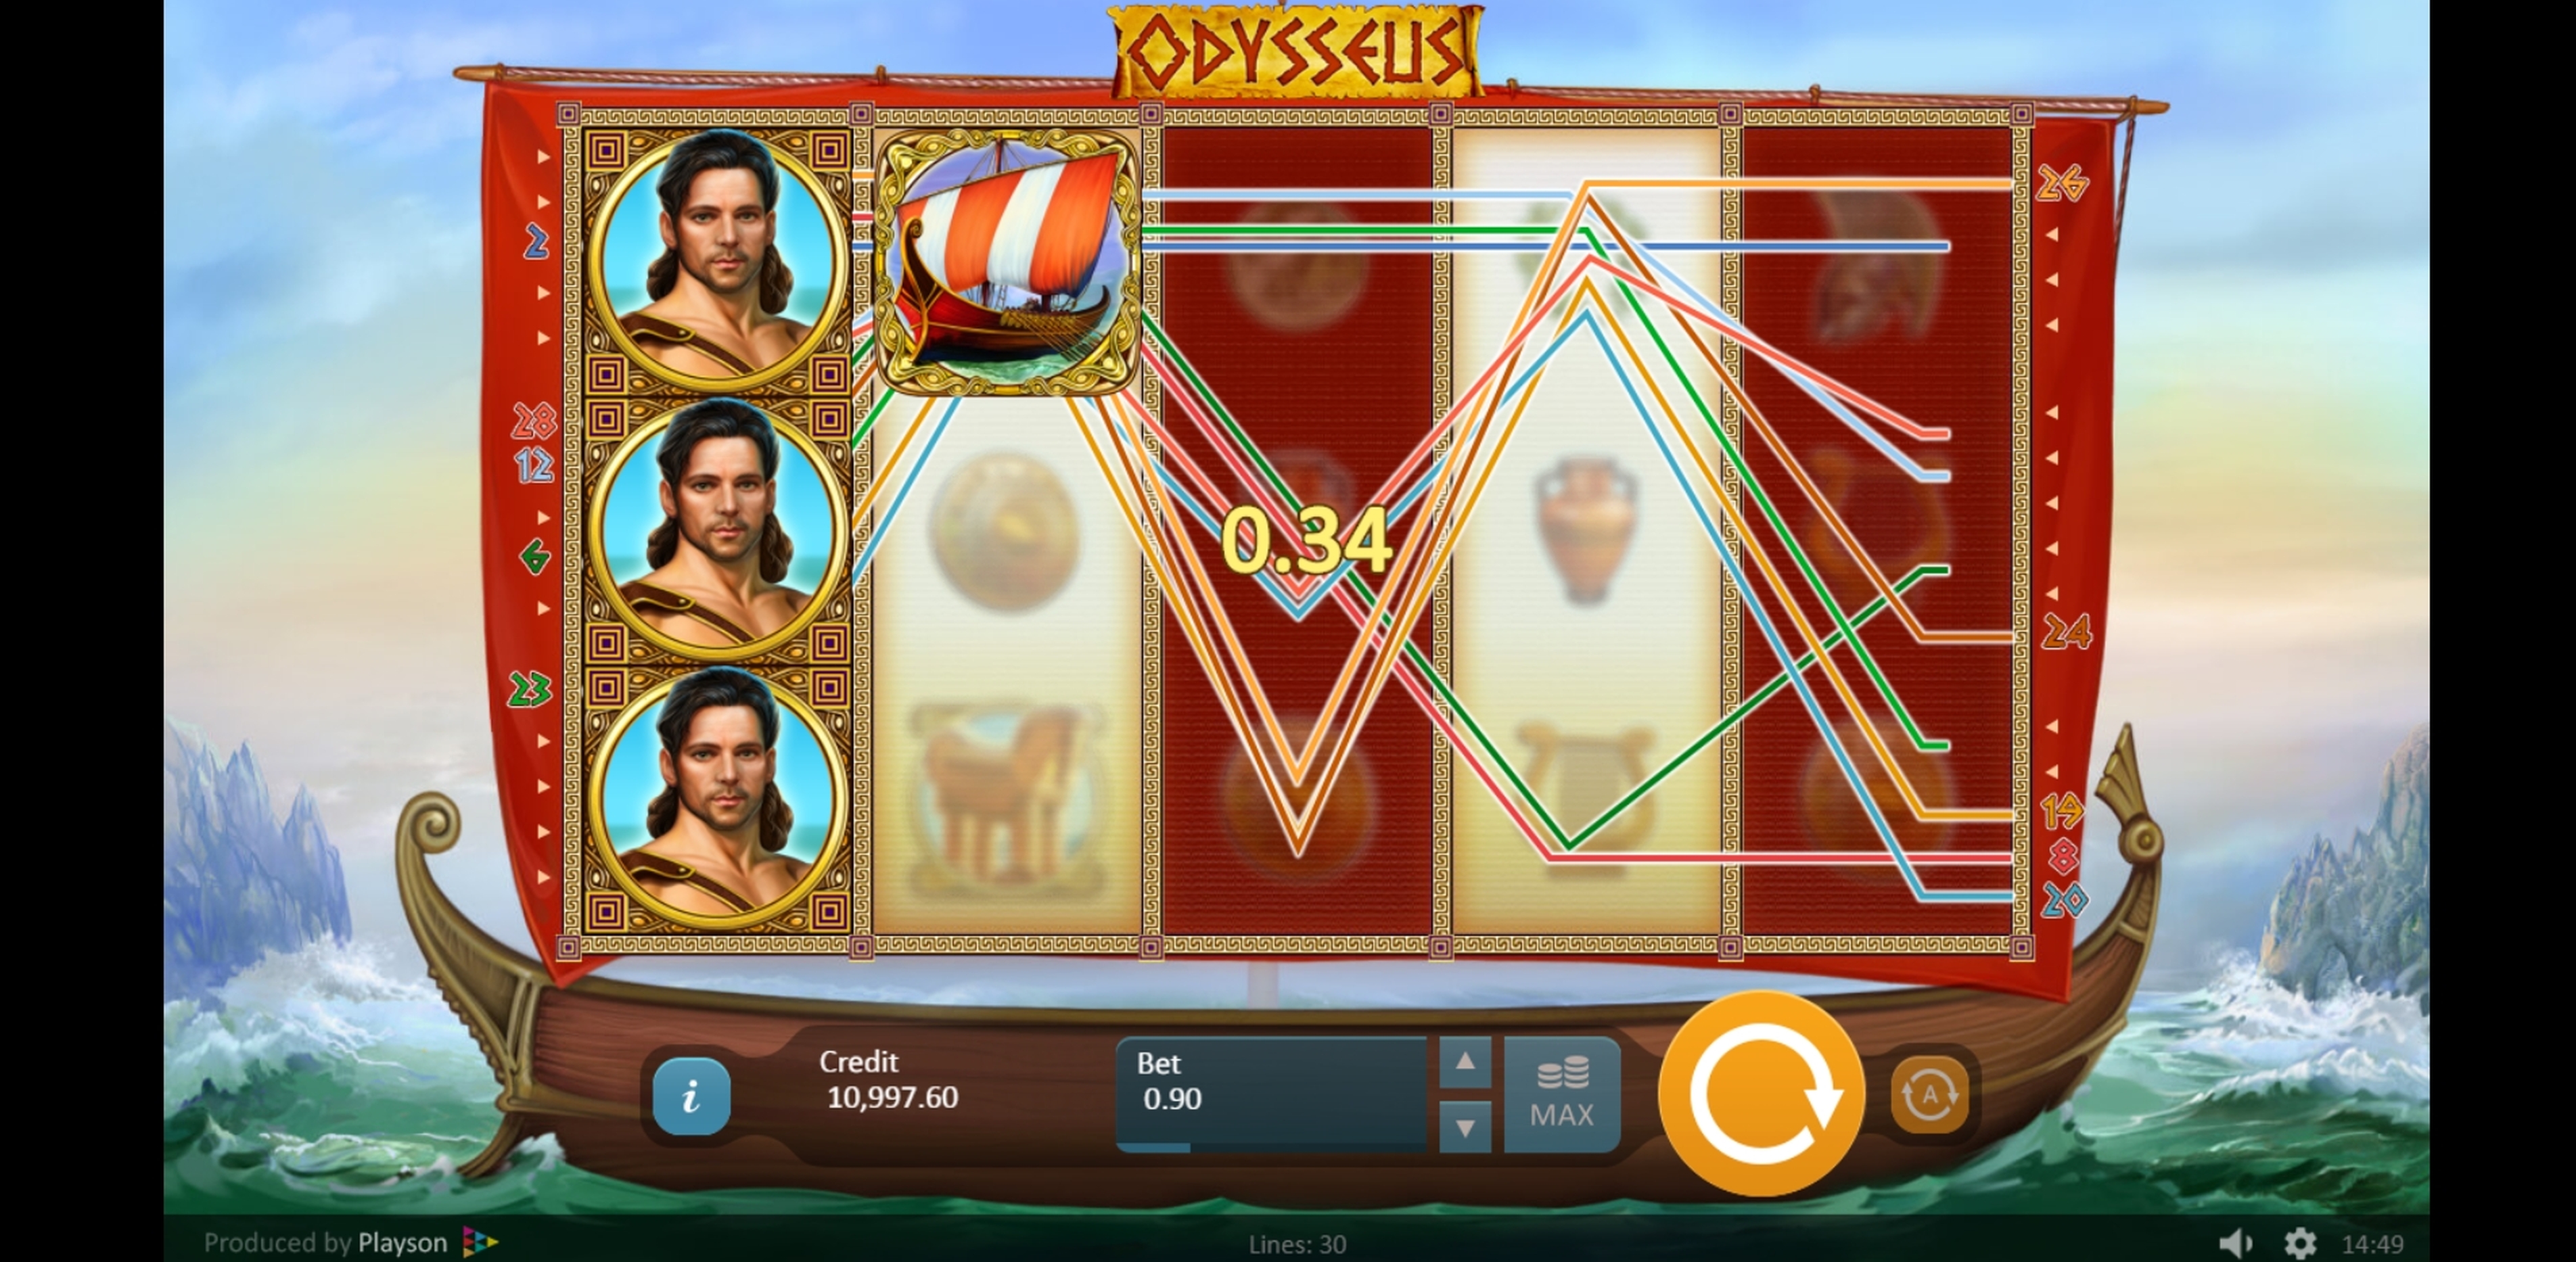 Win Money in Odysseus Free Slot Game by Playson